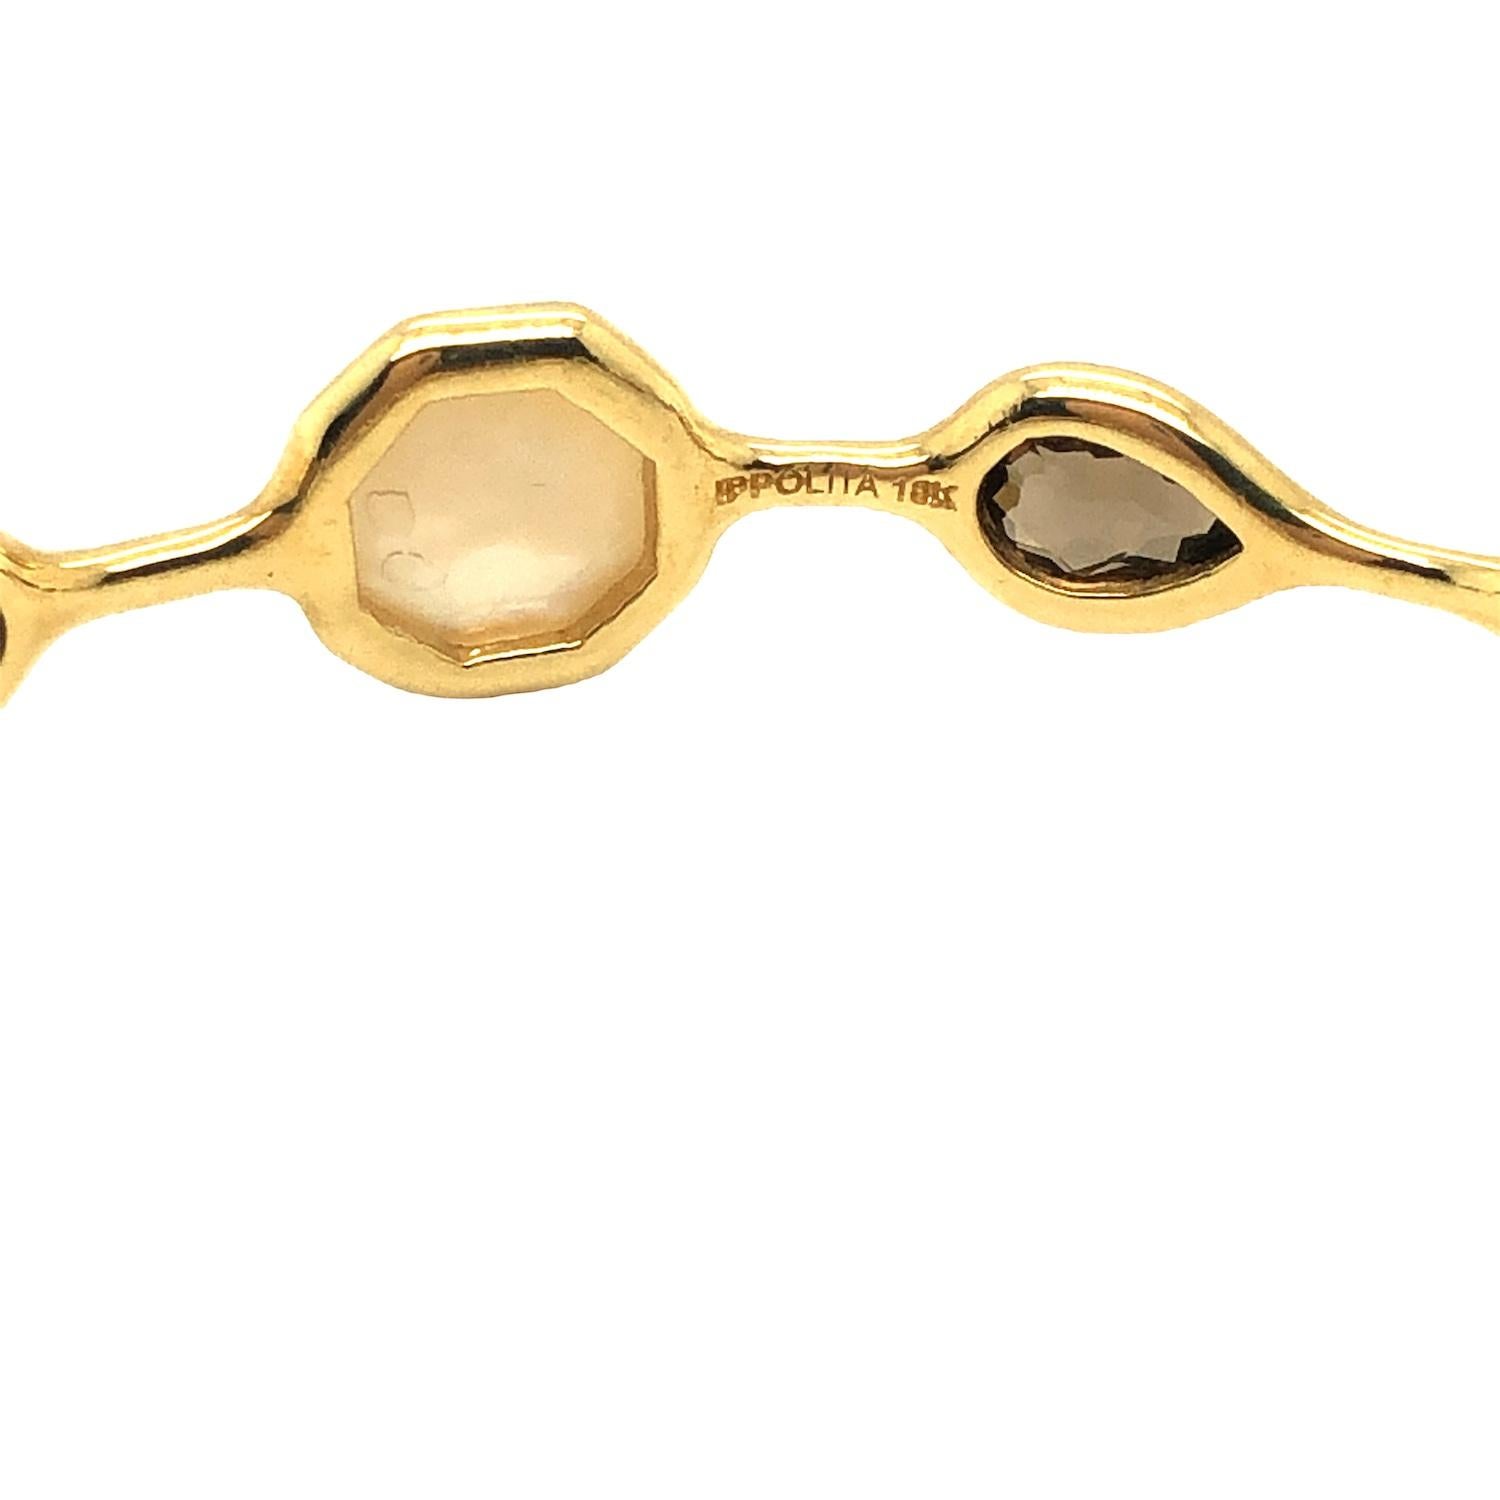 The Rock Candy Collection from Ippolita showcases a bangle bracelet adorned with an array of exquisite gemstones, including mother of pearl, smokey quartz, and onyx, all elegantly arranged in 18K yellow gold. This bracelet measures 8 inches in